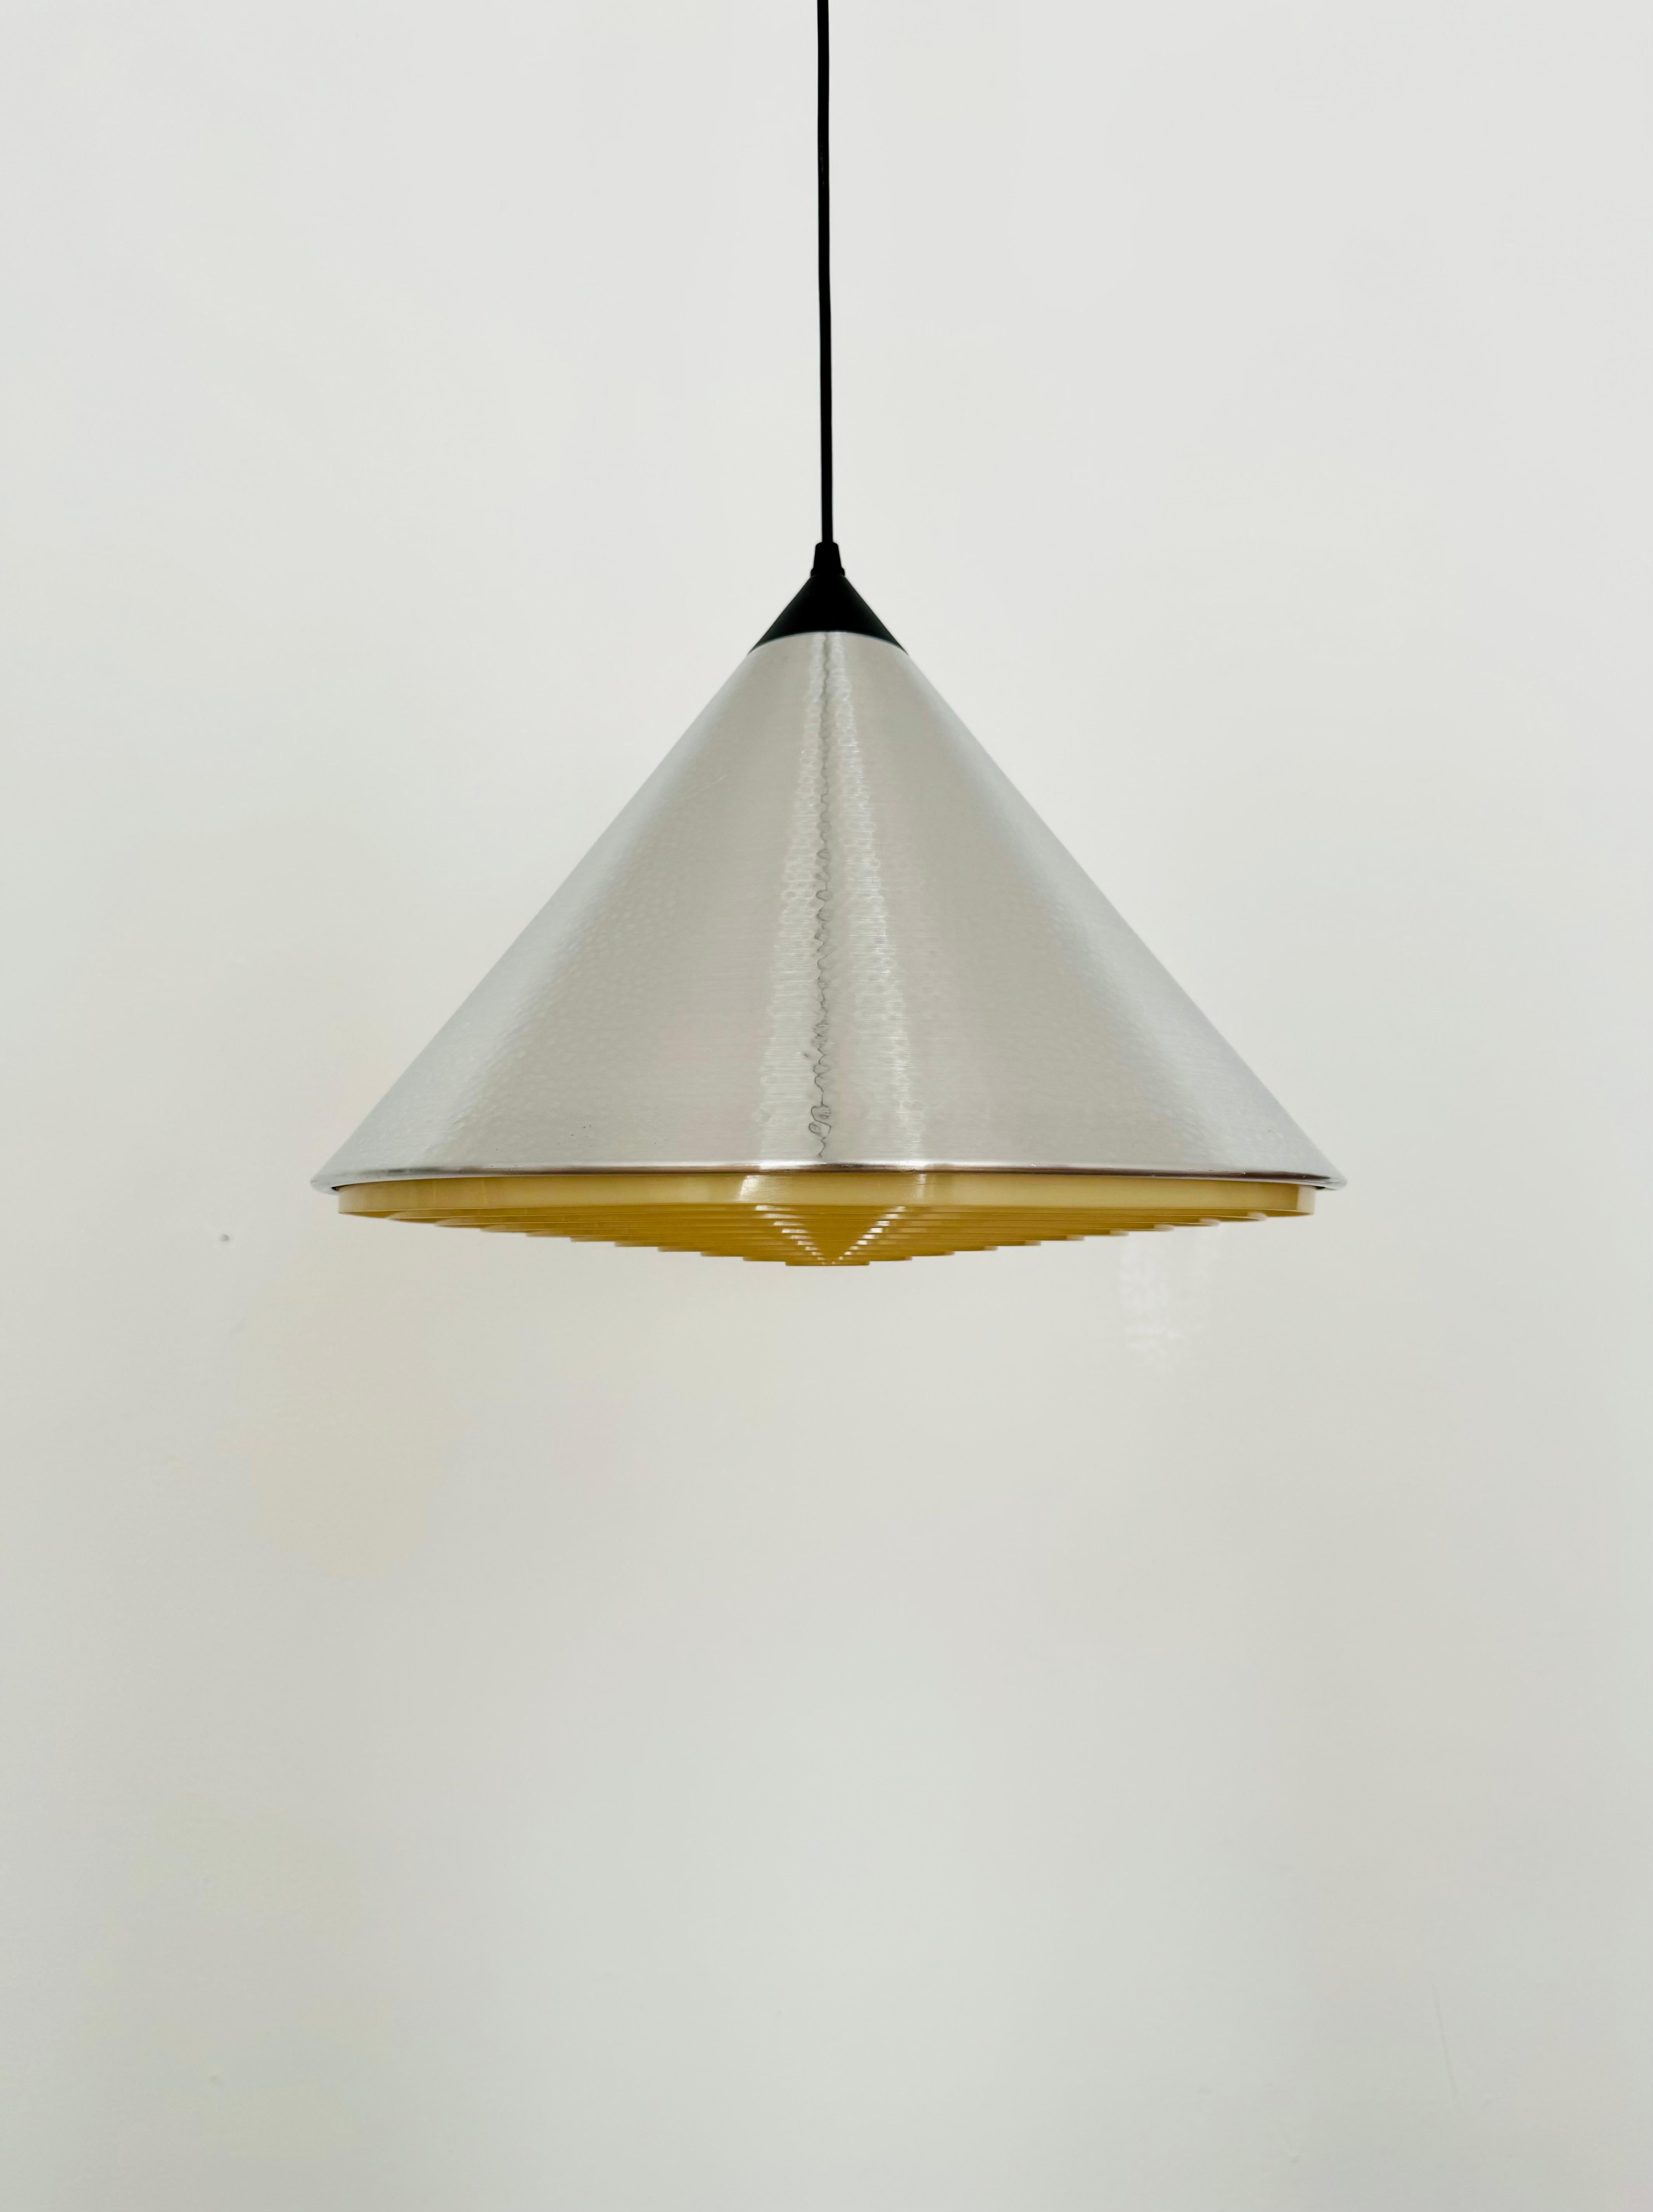 Very nice pendant lamp by Doria from the 1960s.
The plastic reflector creates a wonderful light.
The surface has a hammered look.
Impressively beautiful and contemporary design.

Manufacturer: Doria

Condition:

Very good vintage condition with